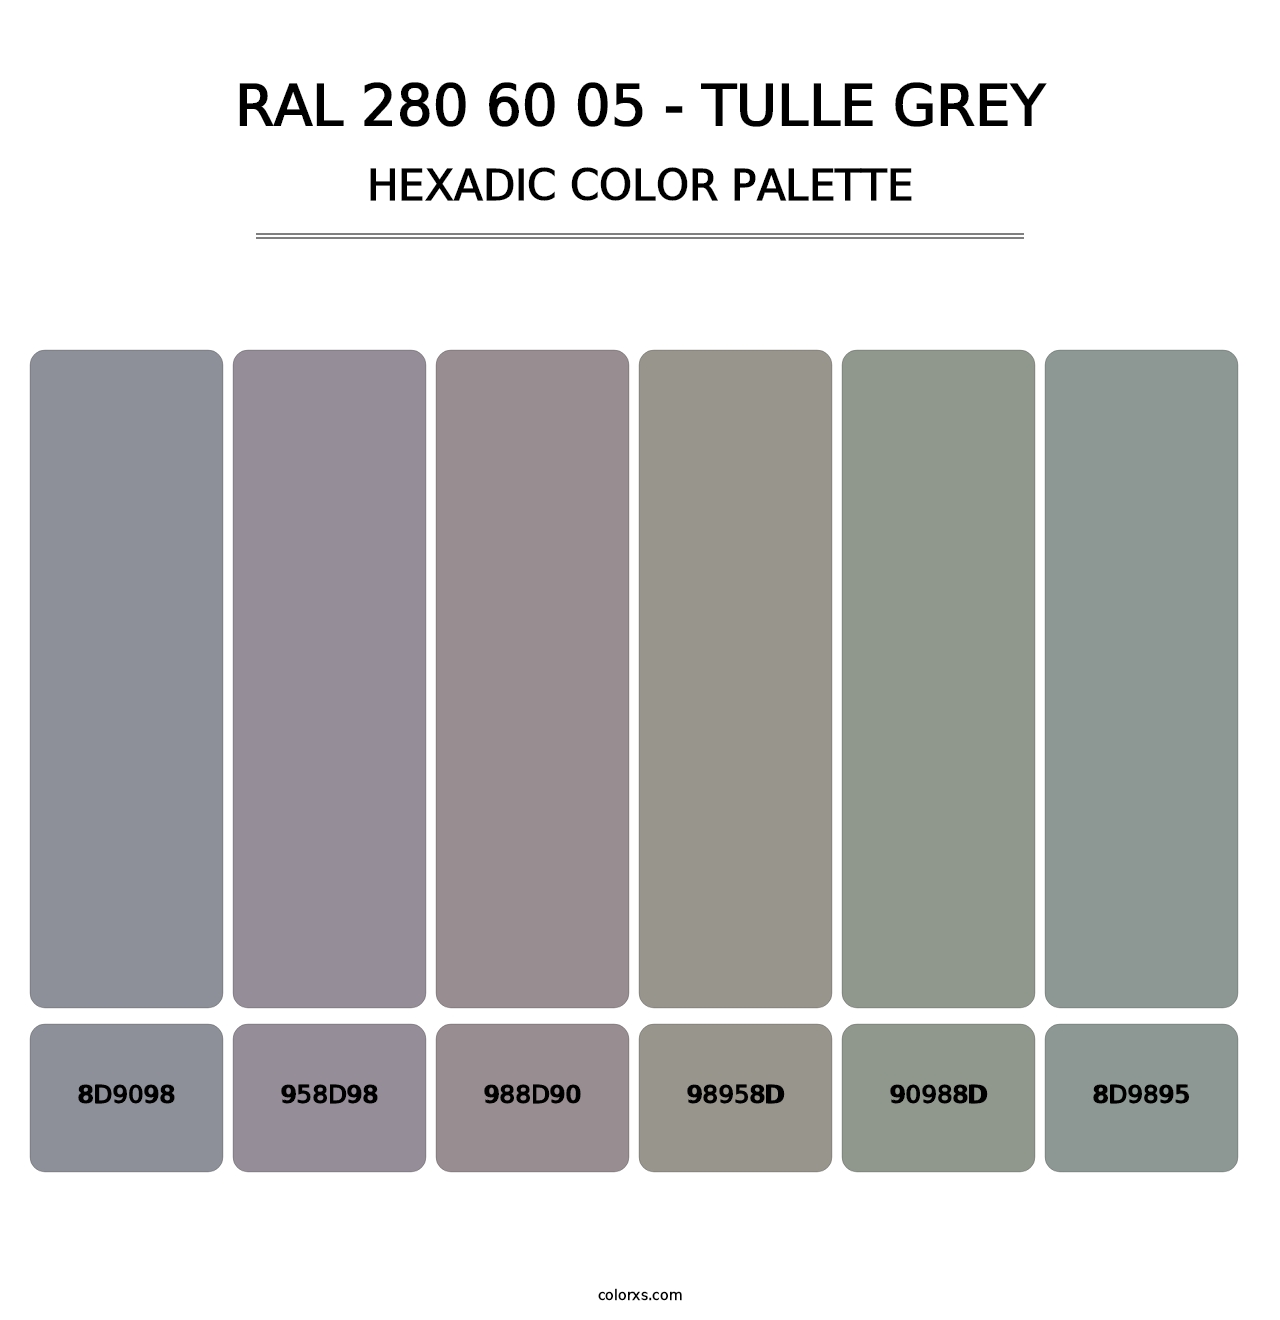 RAL 280 60 05 - Tulle Grey - Hexadic Color Palette